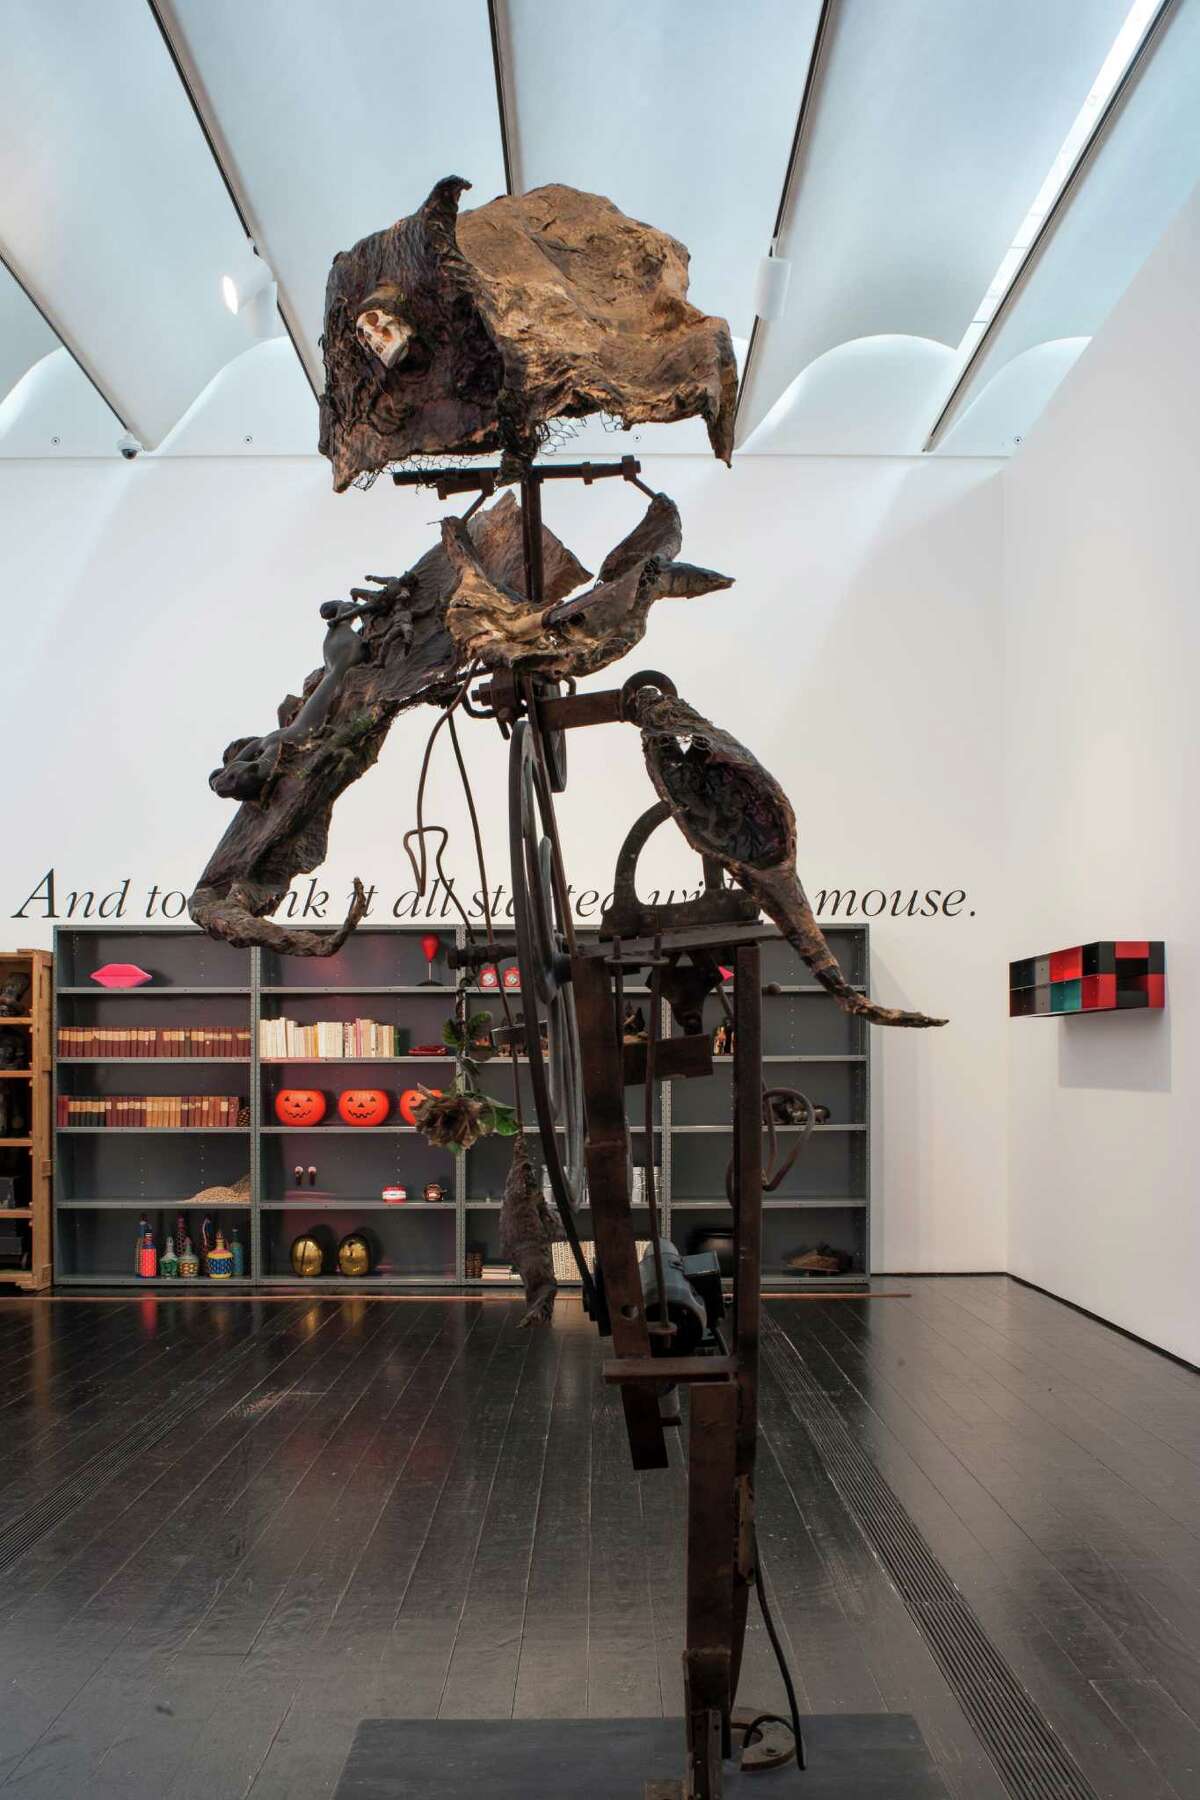 A gallery about the way humans store art and ideas includes a Display of many seemingly unrelated objects and the sculpture "M.O.N.S.T.R.E." by Niki de Saint Phalle and Jean Tinguely in the exhibition "fresh: Haim Steinbach and Objects from the Menil Collection," on view through Aug. 31.